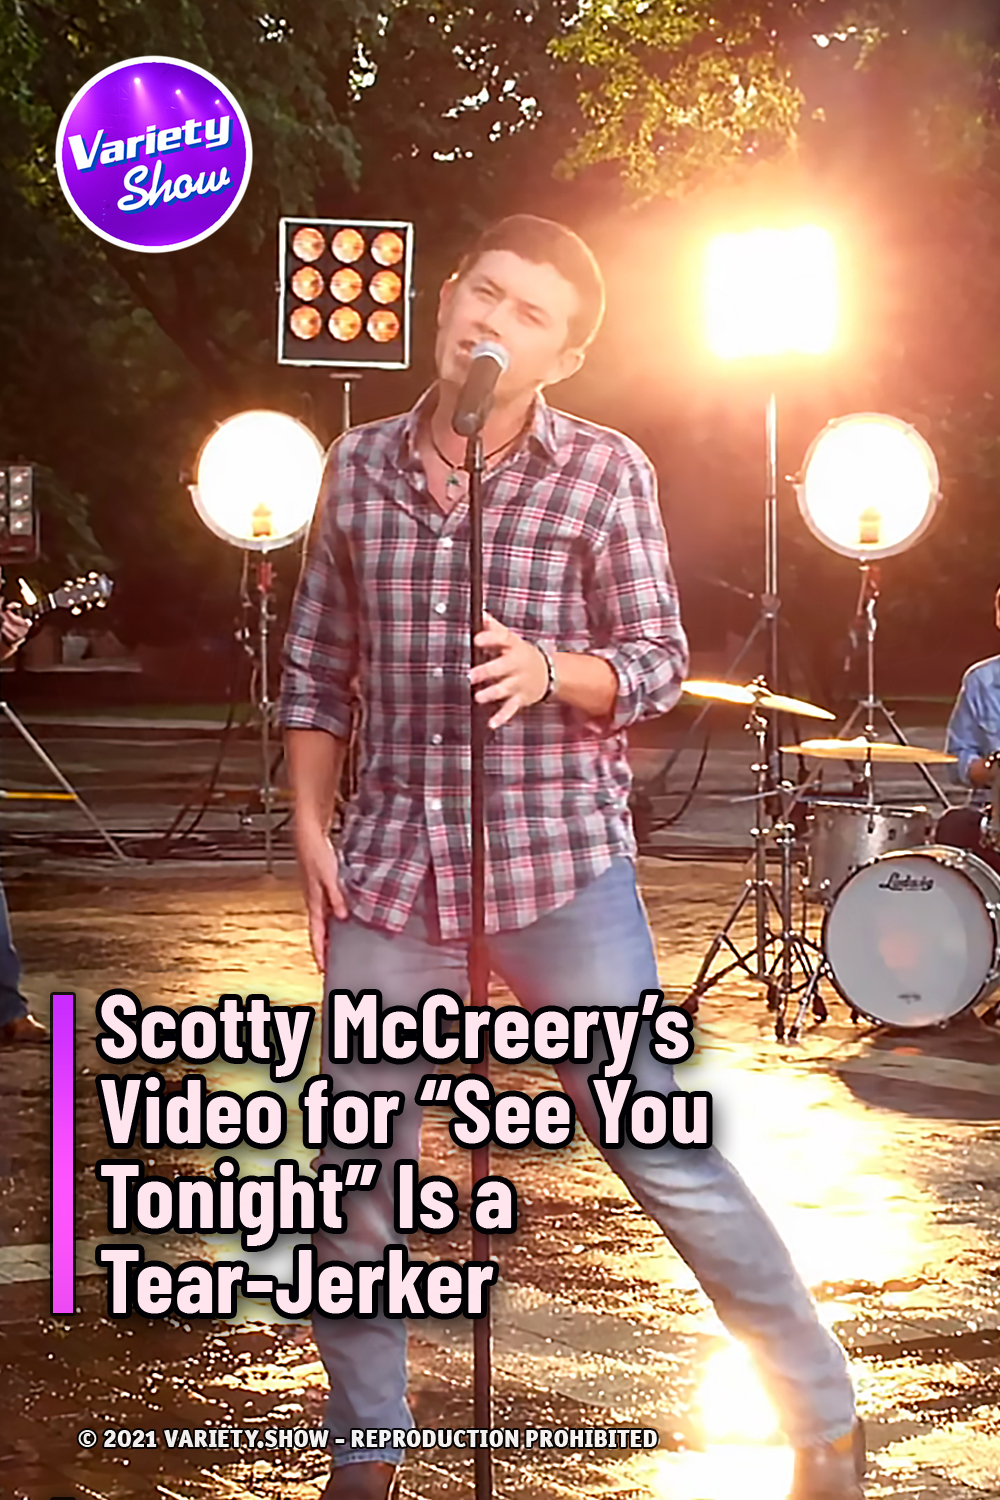 Scotty McCreery’s Video for “See You Tonight” Is a Tear-Jerker